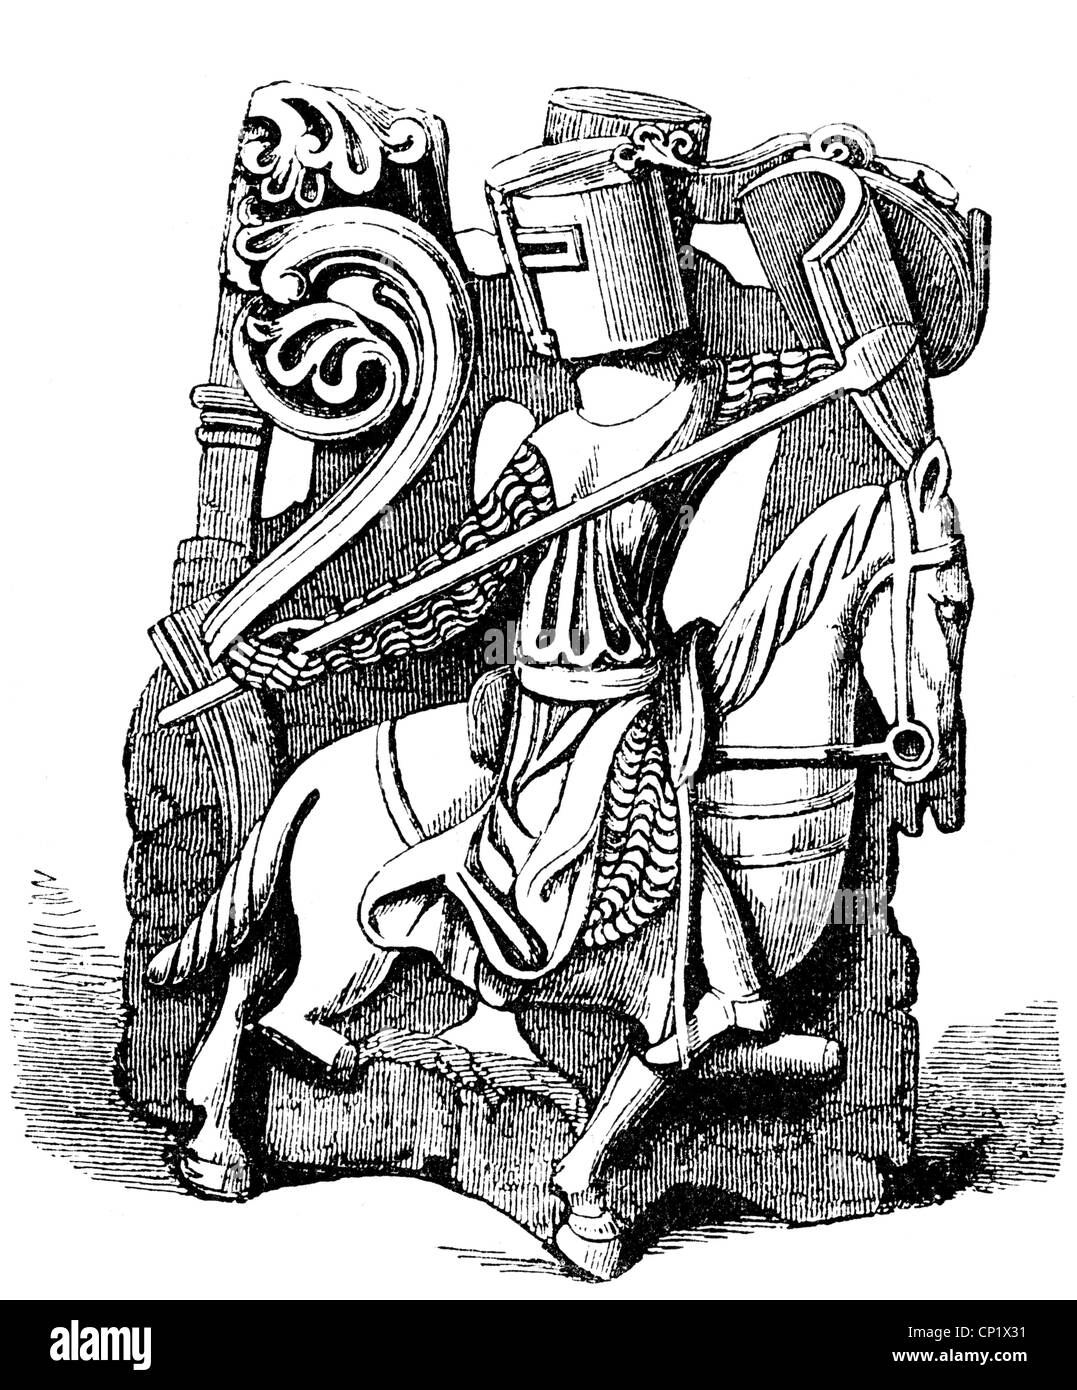 Middle Ages, knights, English knight at the beginning of the 13th century, wood engraving, 19th century, after an ivory carving, military, horse, horses, lance, lances, spear, spears, shield, shields, knight's armour, knight's armor, helmets, helmet, rider, riders, cavalryman, cavalrymen, medieval, mediaeval, soldier, soldiers, historic, historical, people, Additional-Rights-Clearences-Not Available Stock Photo